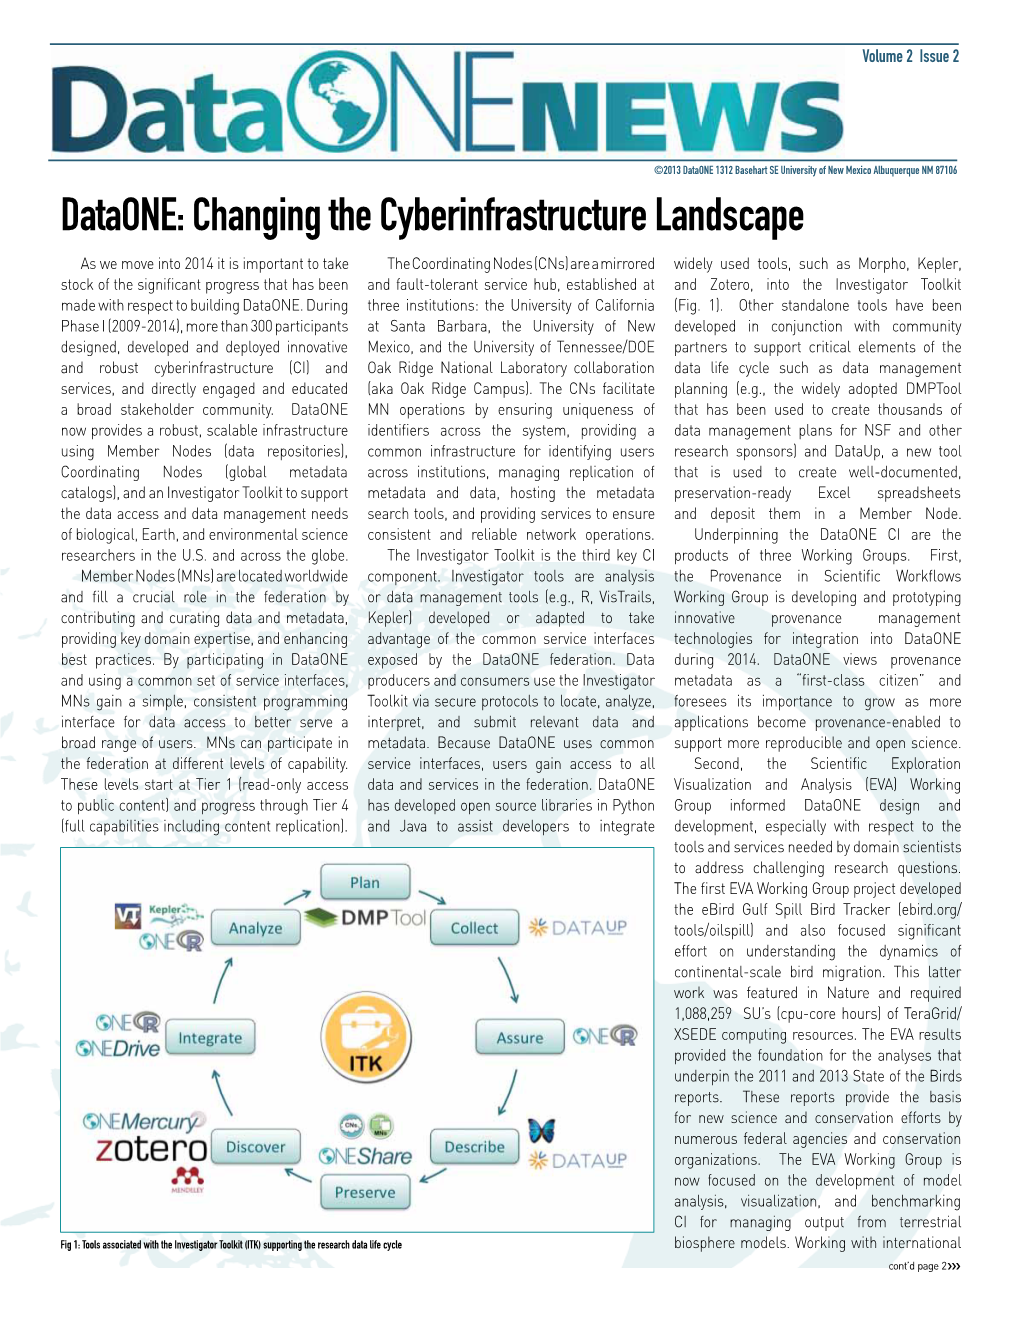 Changing the Cyberinfrastructure Landscape